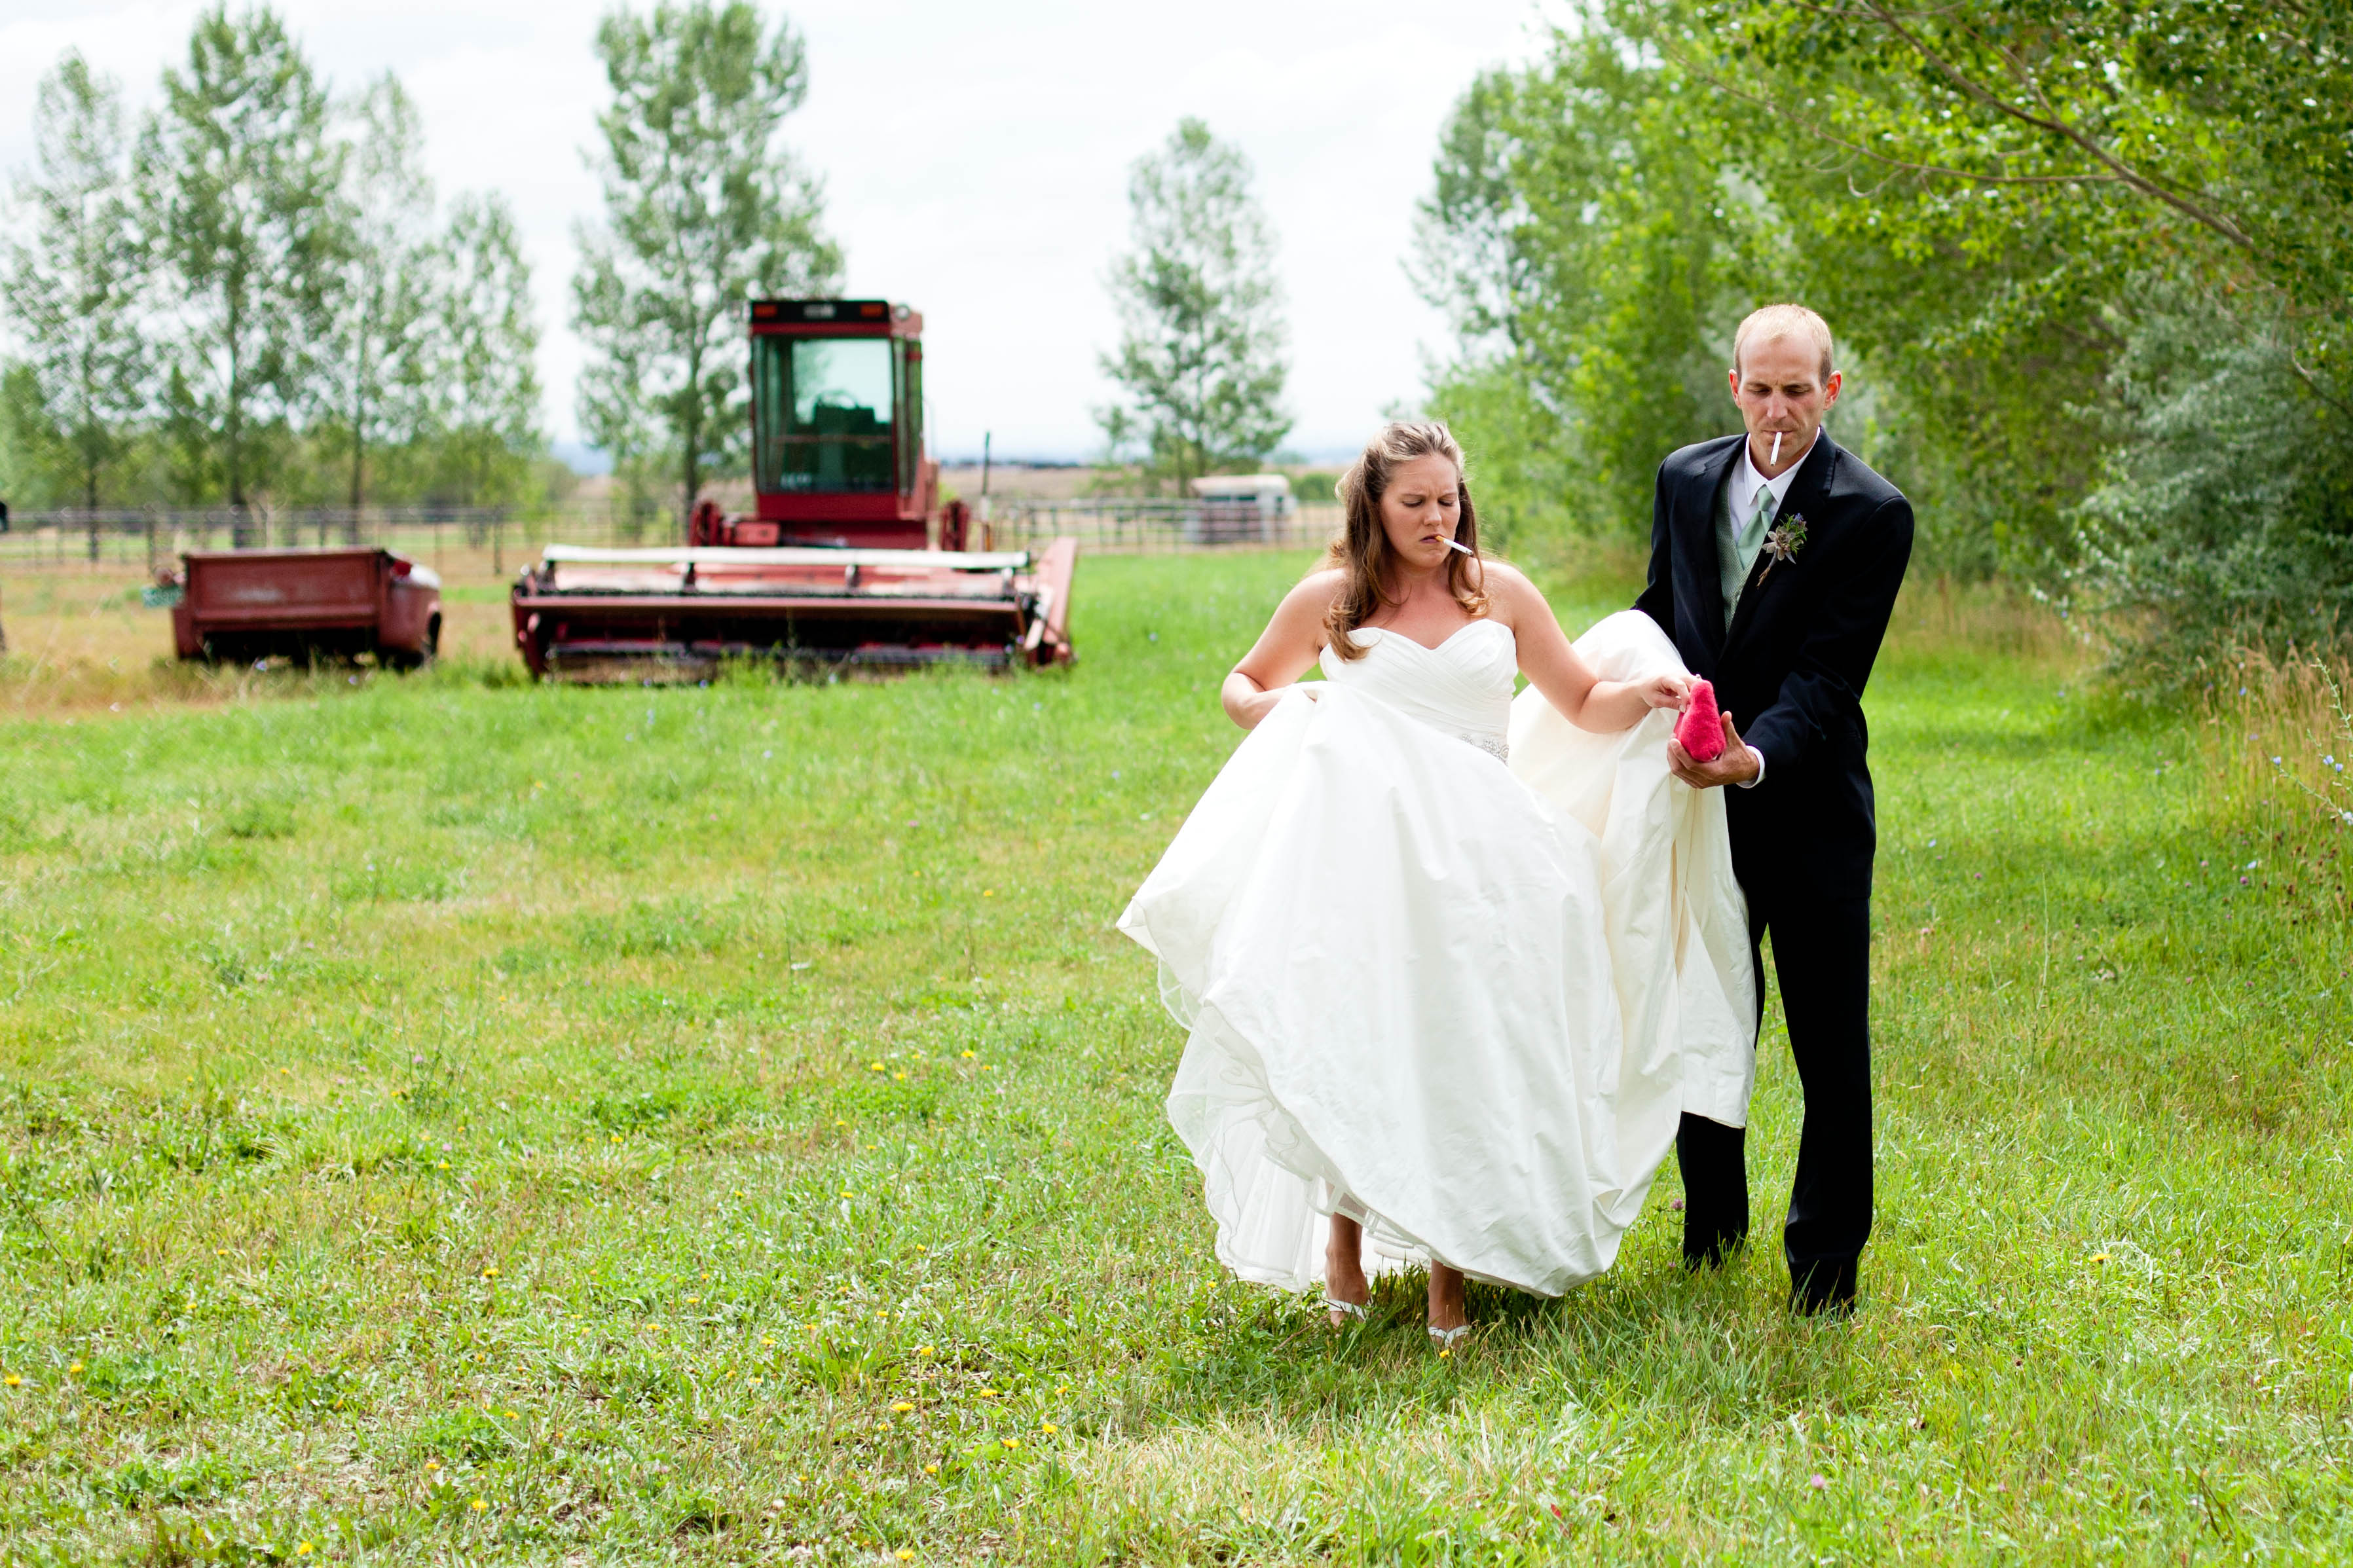 a bride and groom smoke while walking away from red farm equipment